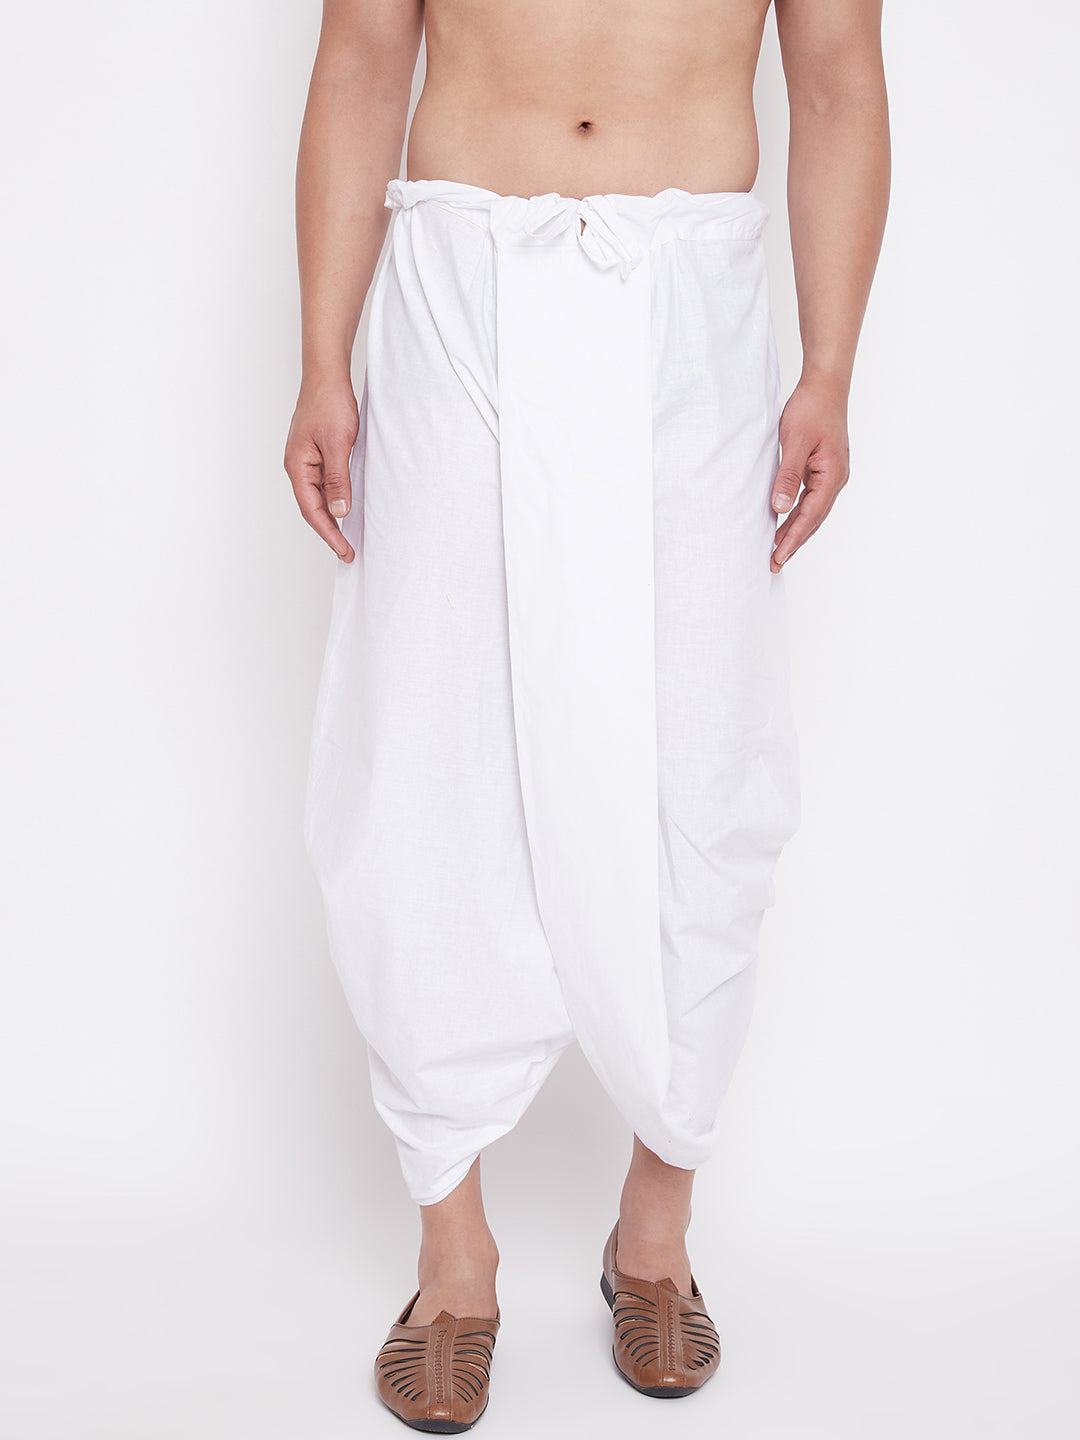 All You Need To Know About Styling Dhoti Pants | Indian men fashion, Indian  groom wear, Groom dress men